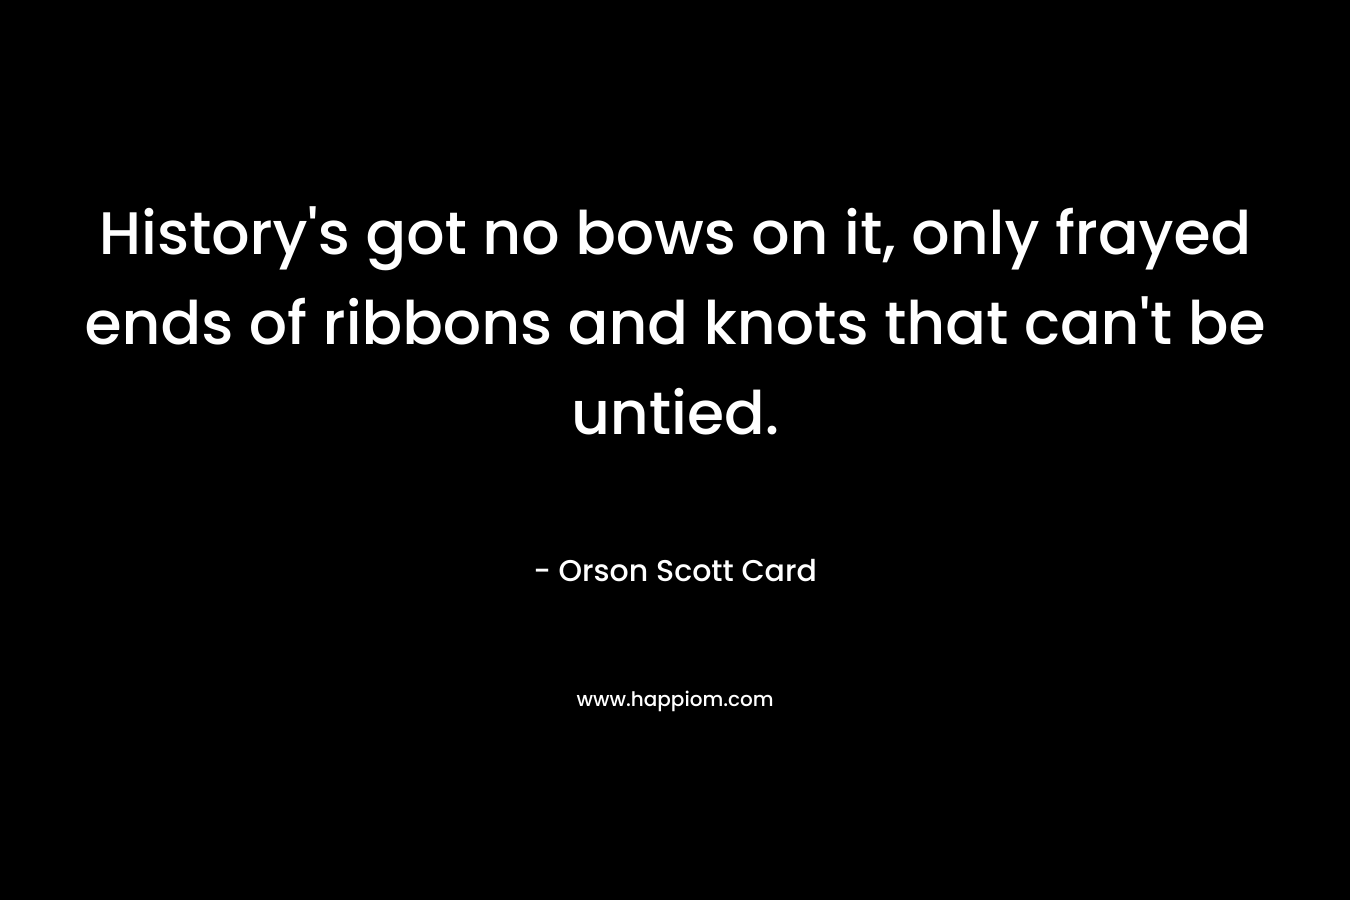 History’s got no bows on it, only frayed ends of ribbons and knots that can’t be untied. – Orson Scott Card